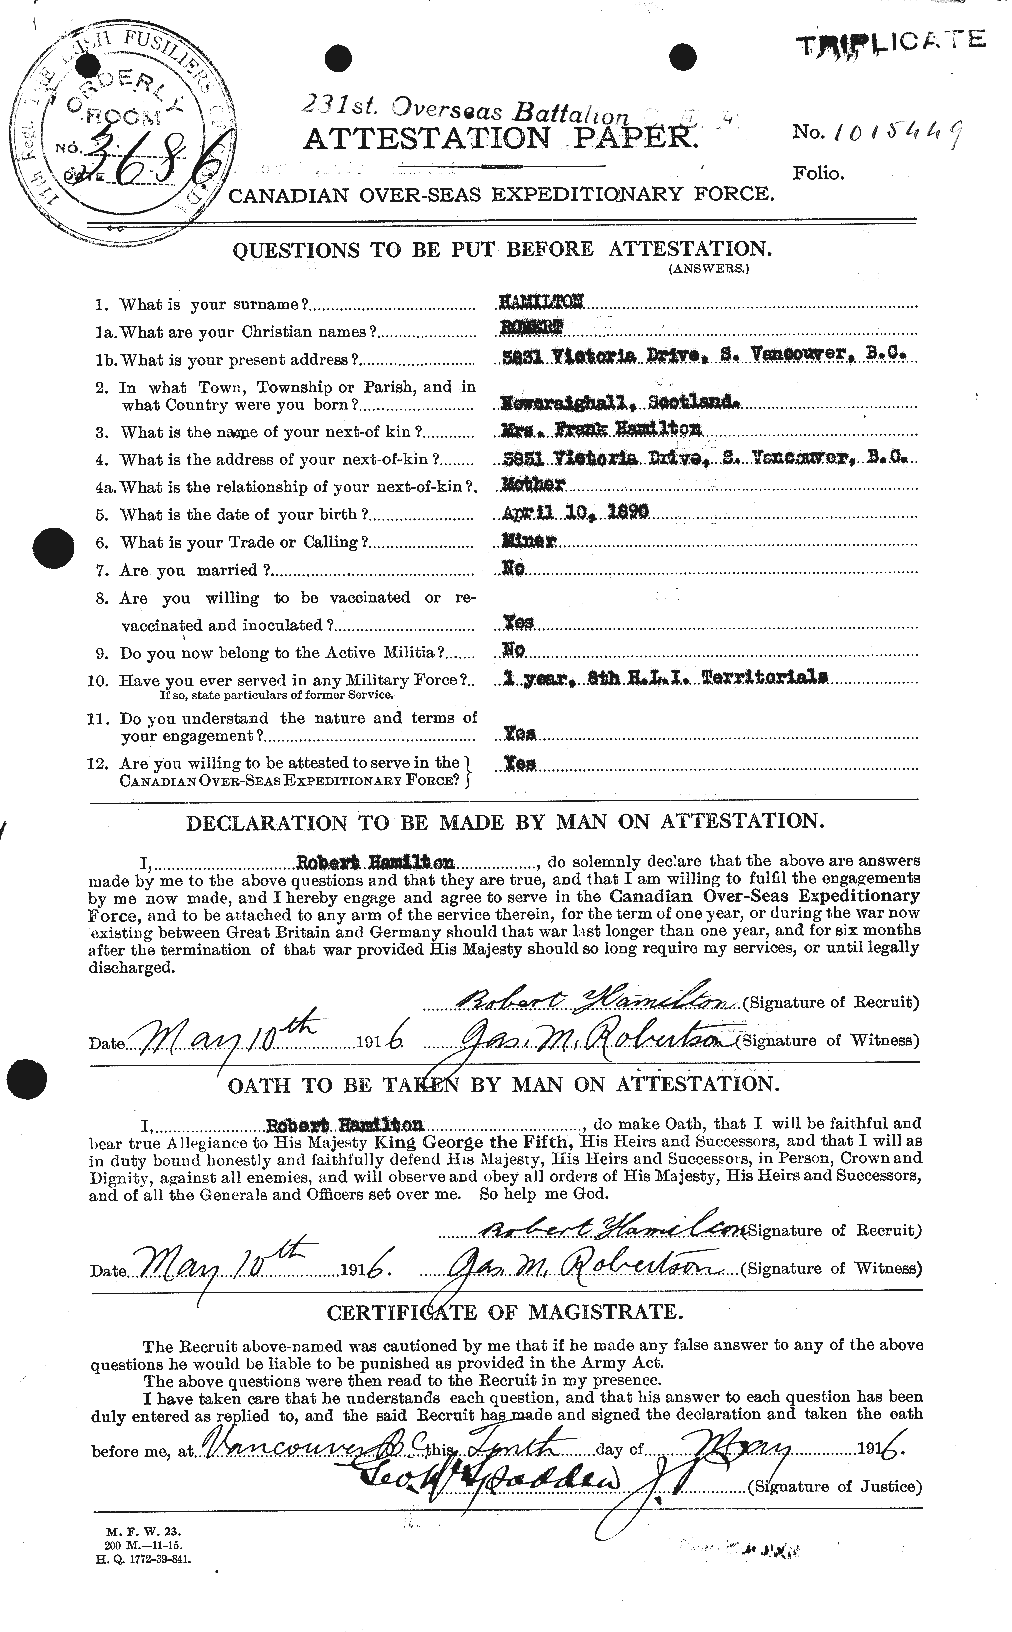 Personnel Records of the First World War - CEF 373234a